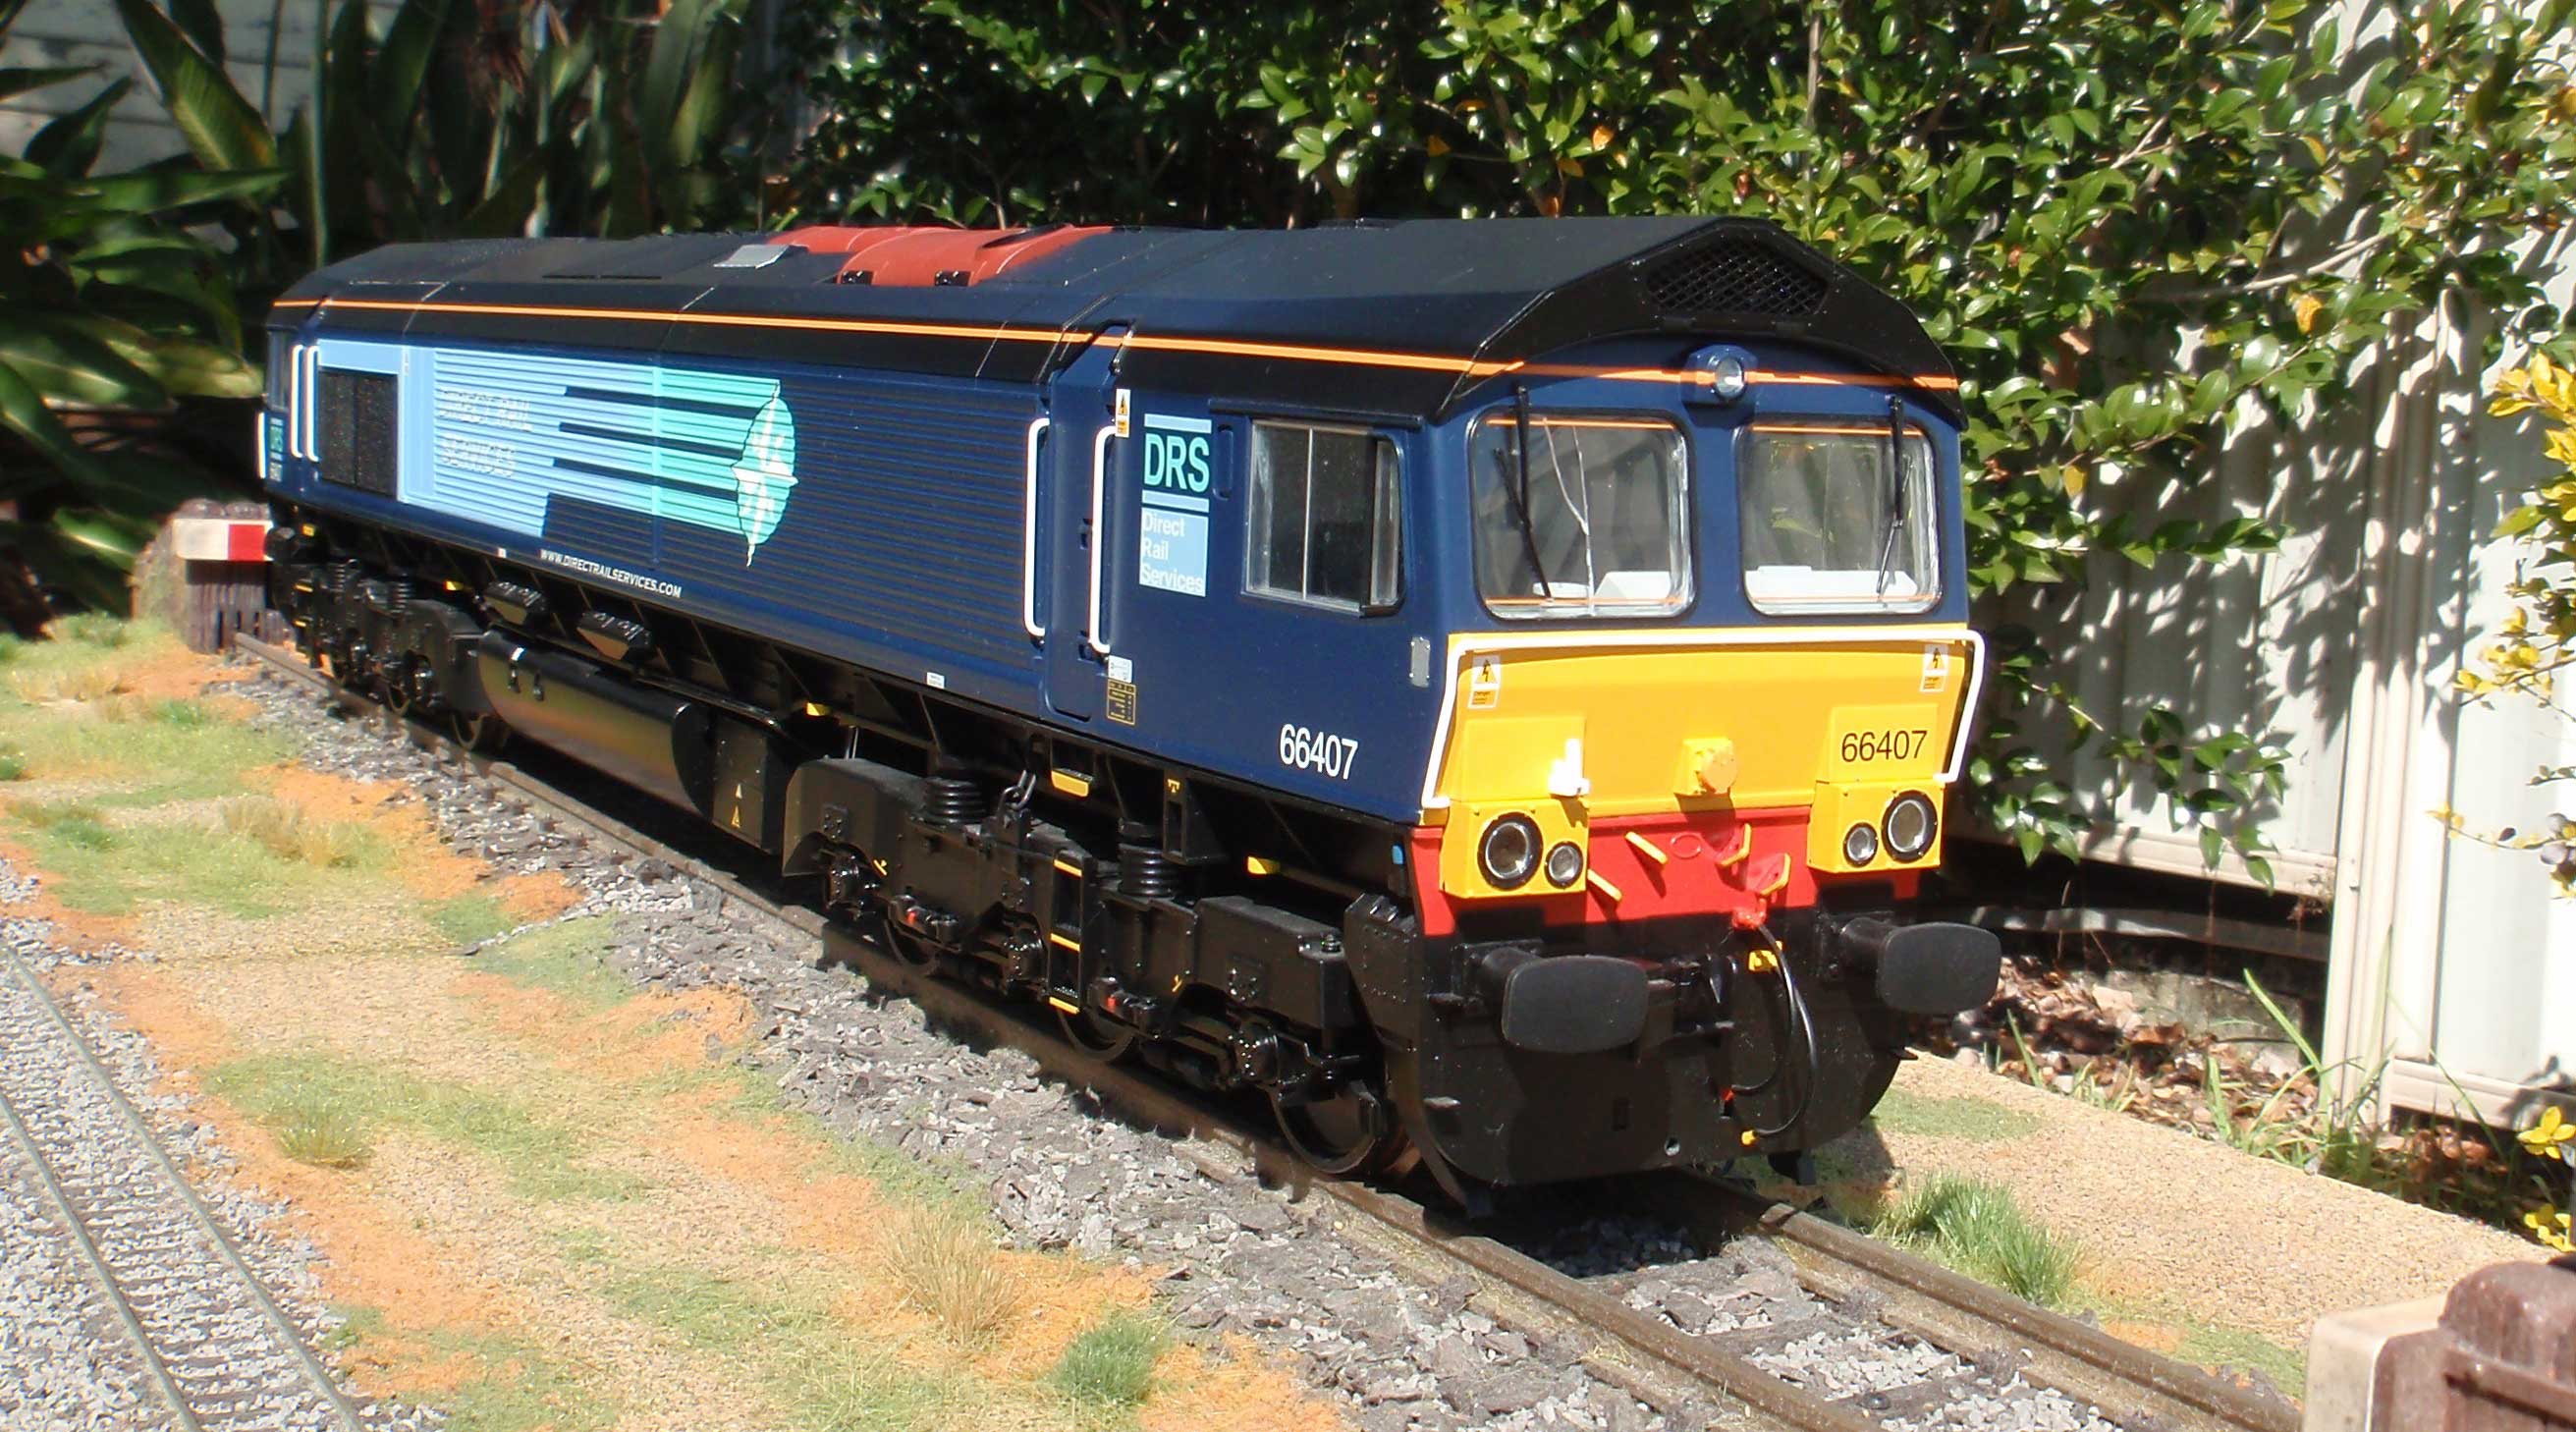 Aristocraft Trains (G Scale) 66 Class ‘Direct Rail Services’ livery